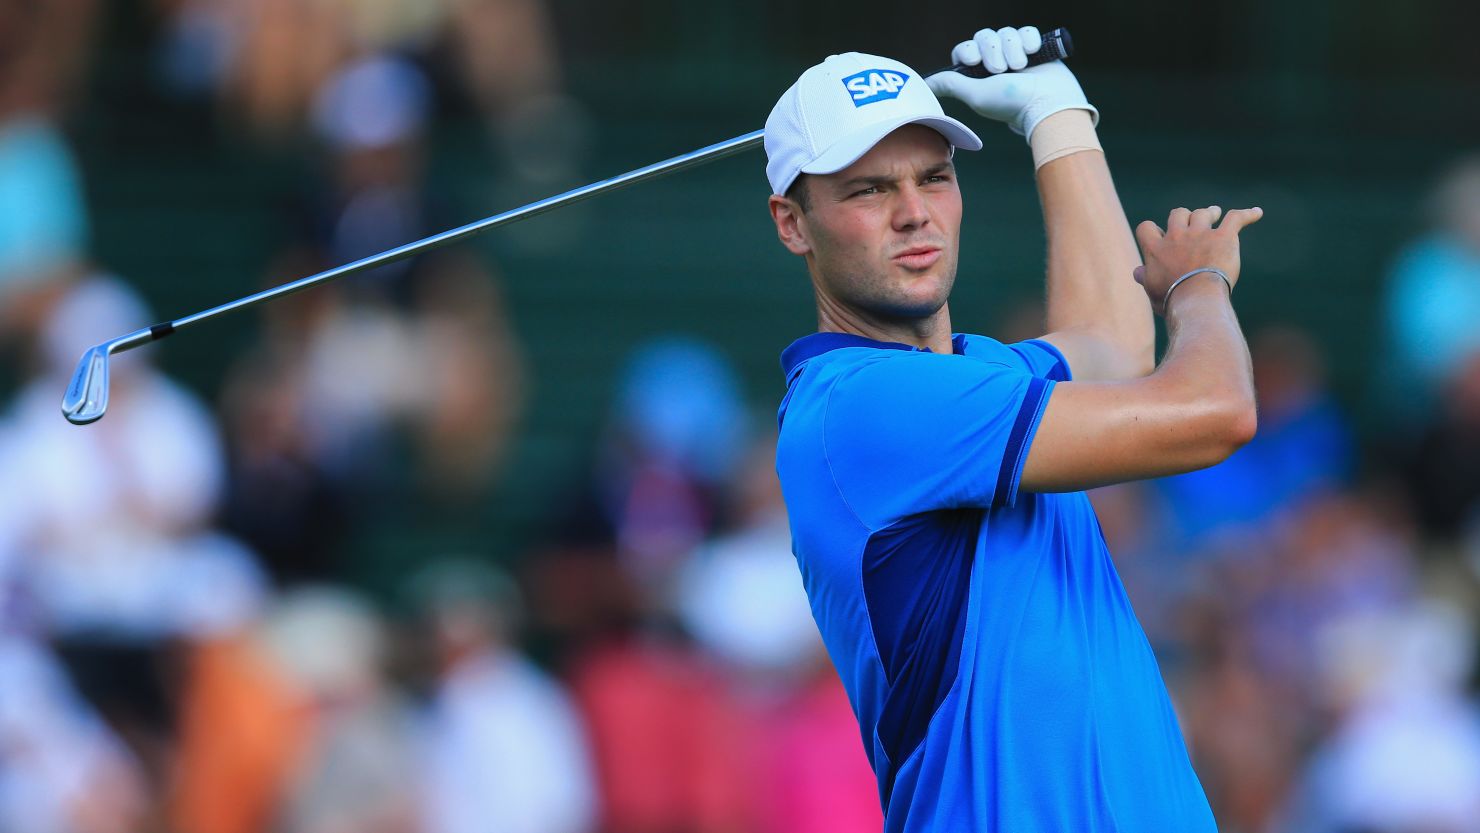 Martin Kaymer topped the leaderboard on the opening day of the U.S. Open.